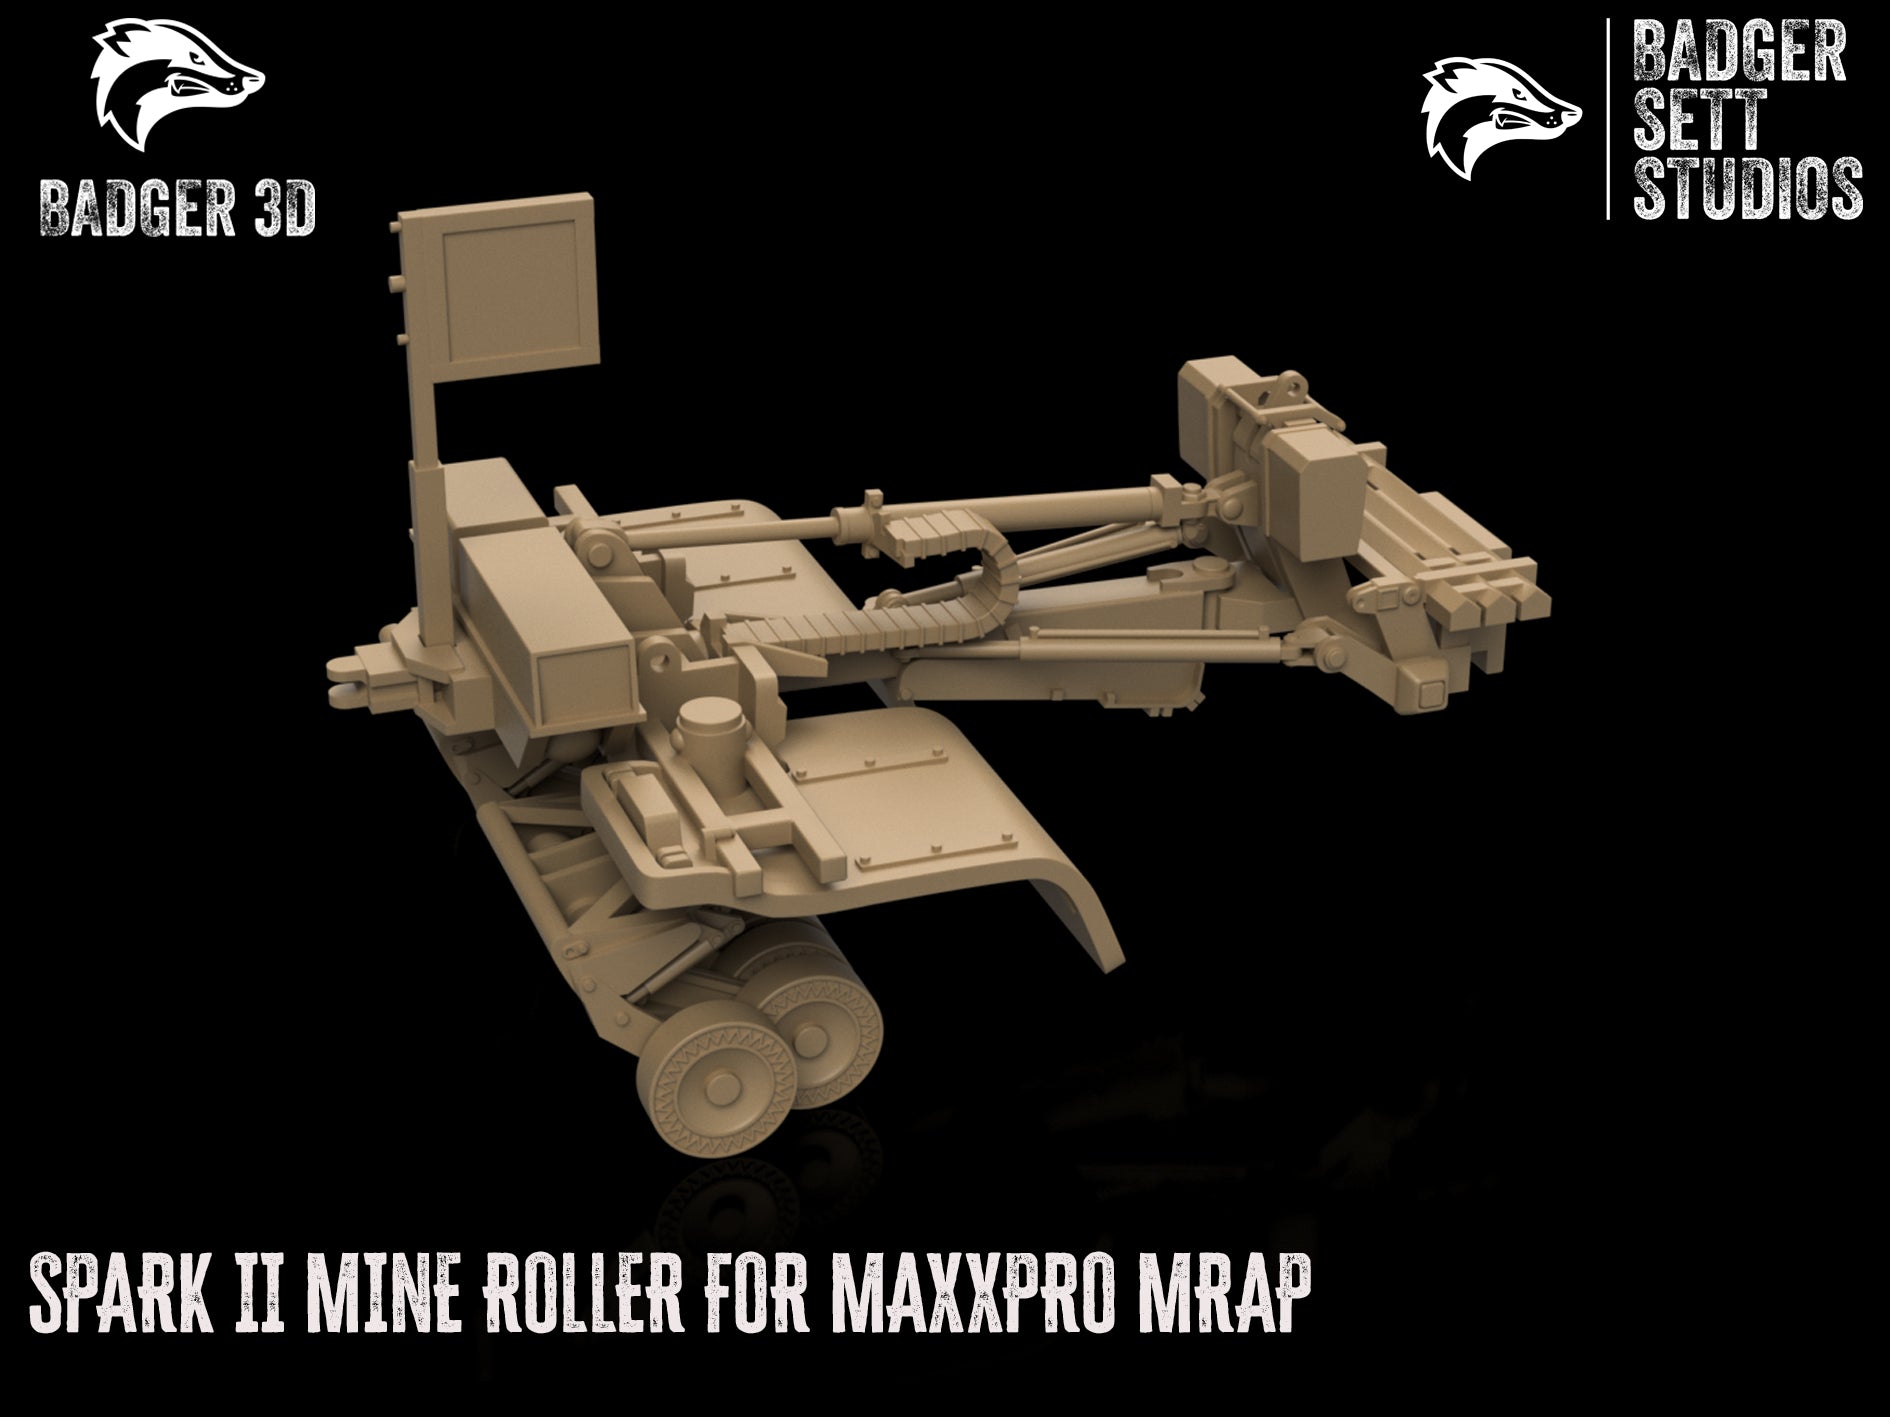 SPARK II Mine Roller for MaxxPro MRAP